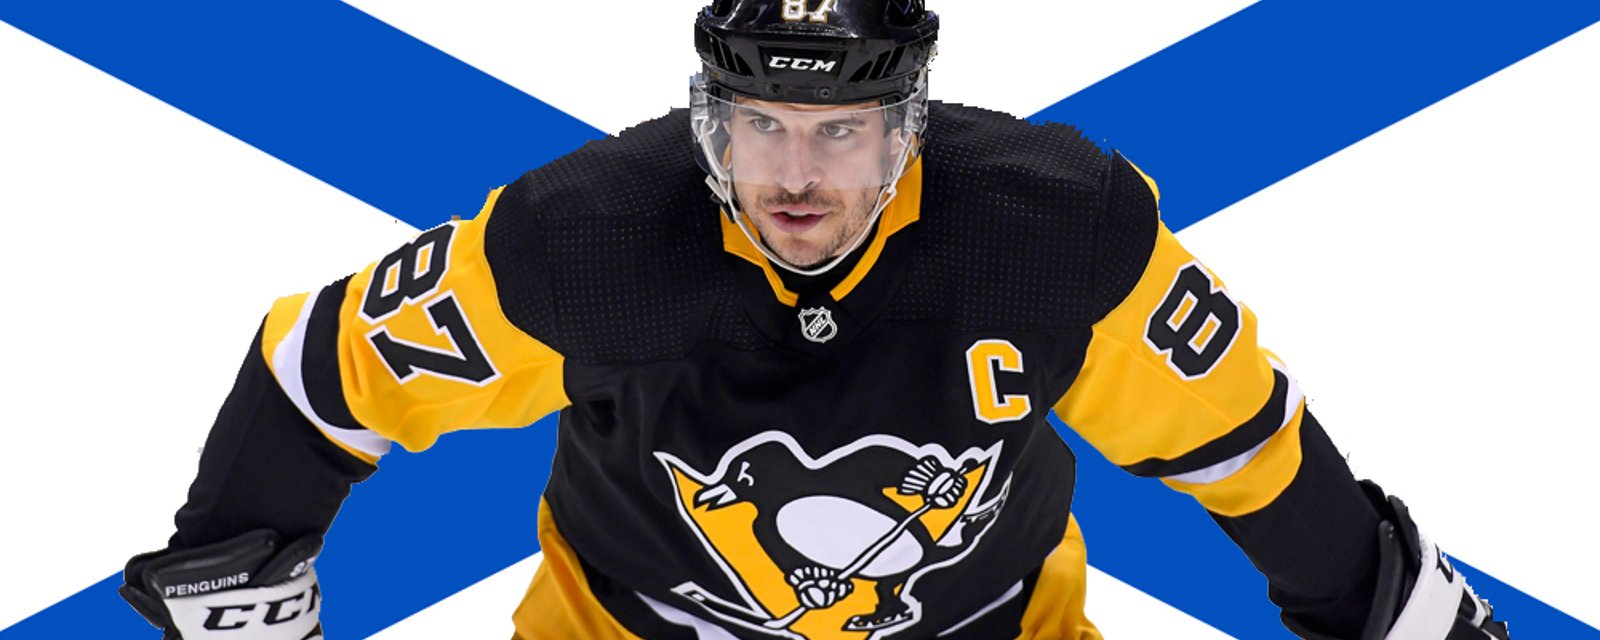 Crosby issues a statement on the senseless tragedy in his native Nova Scotia